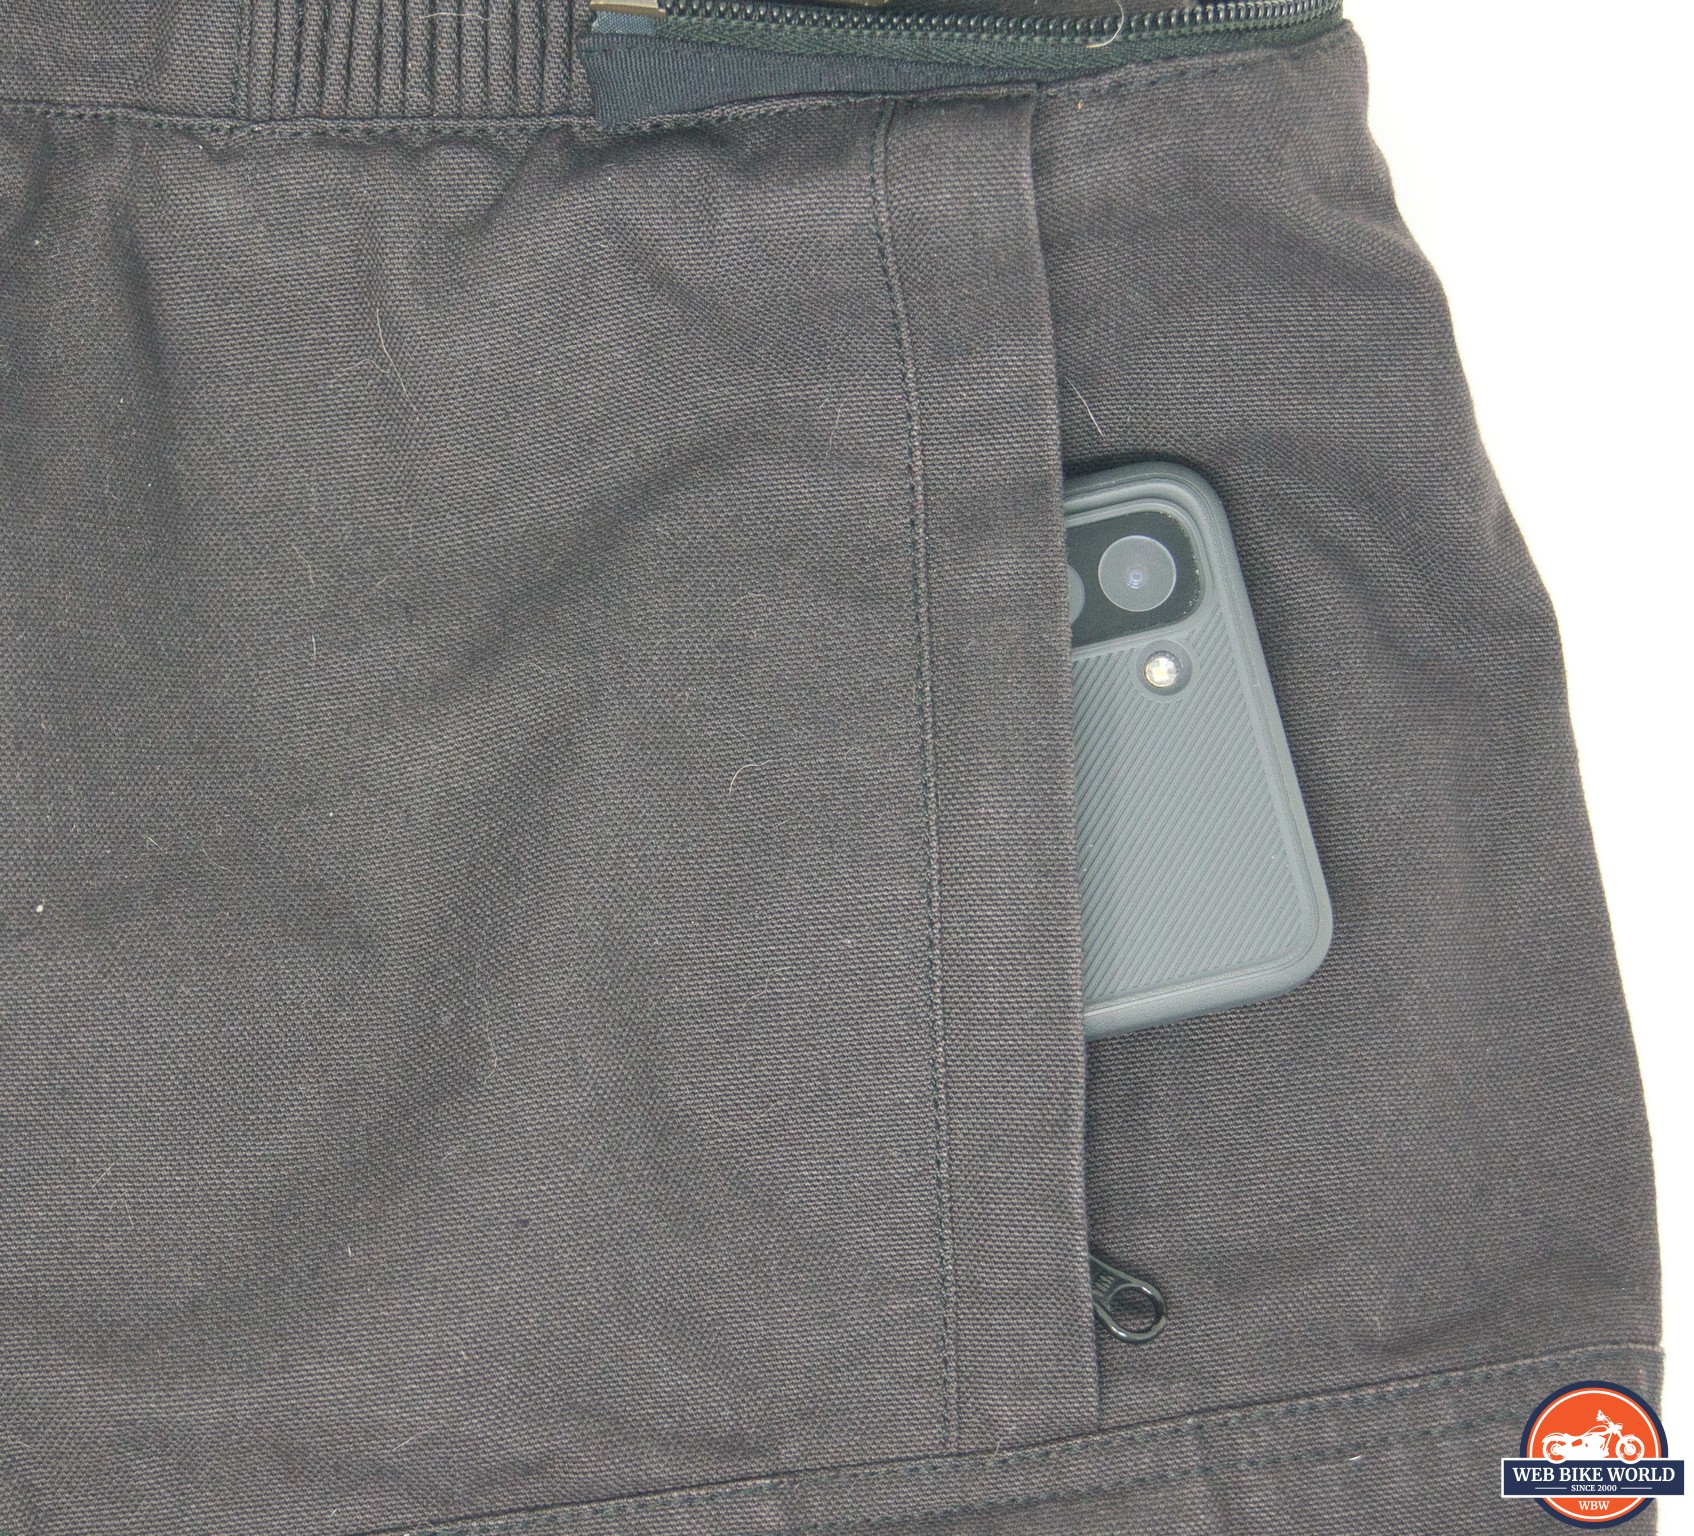 Closeup of a smartphone in the front left pocket